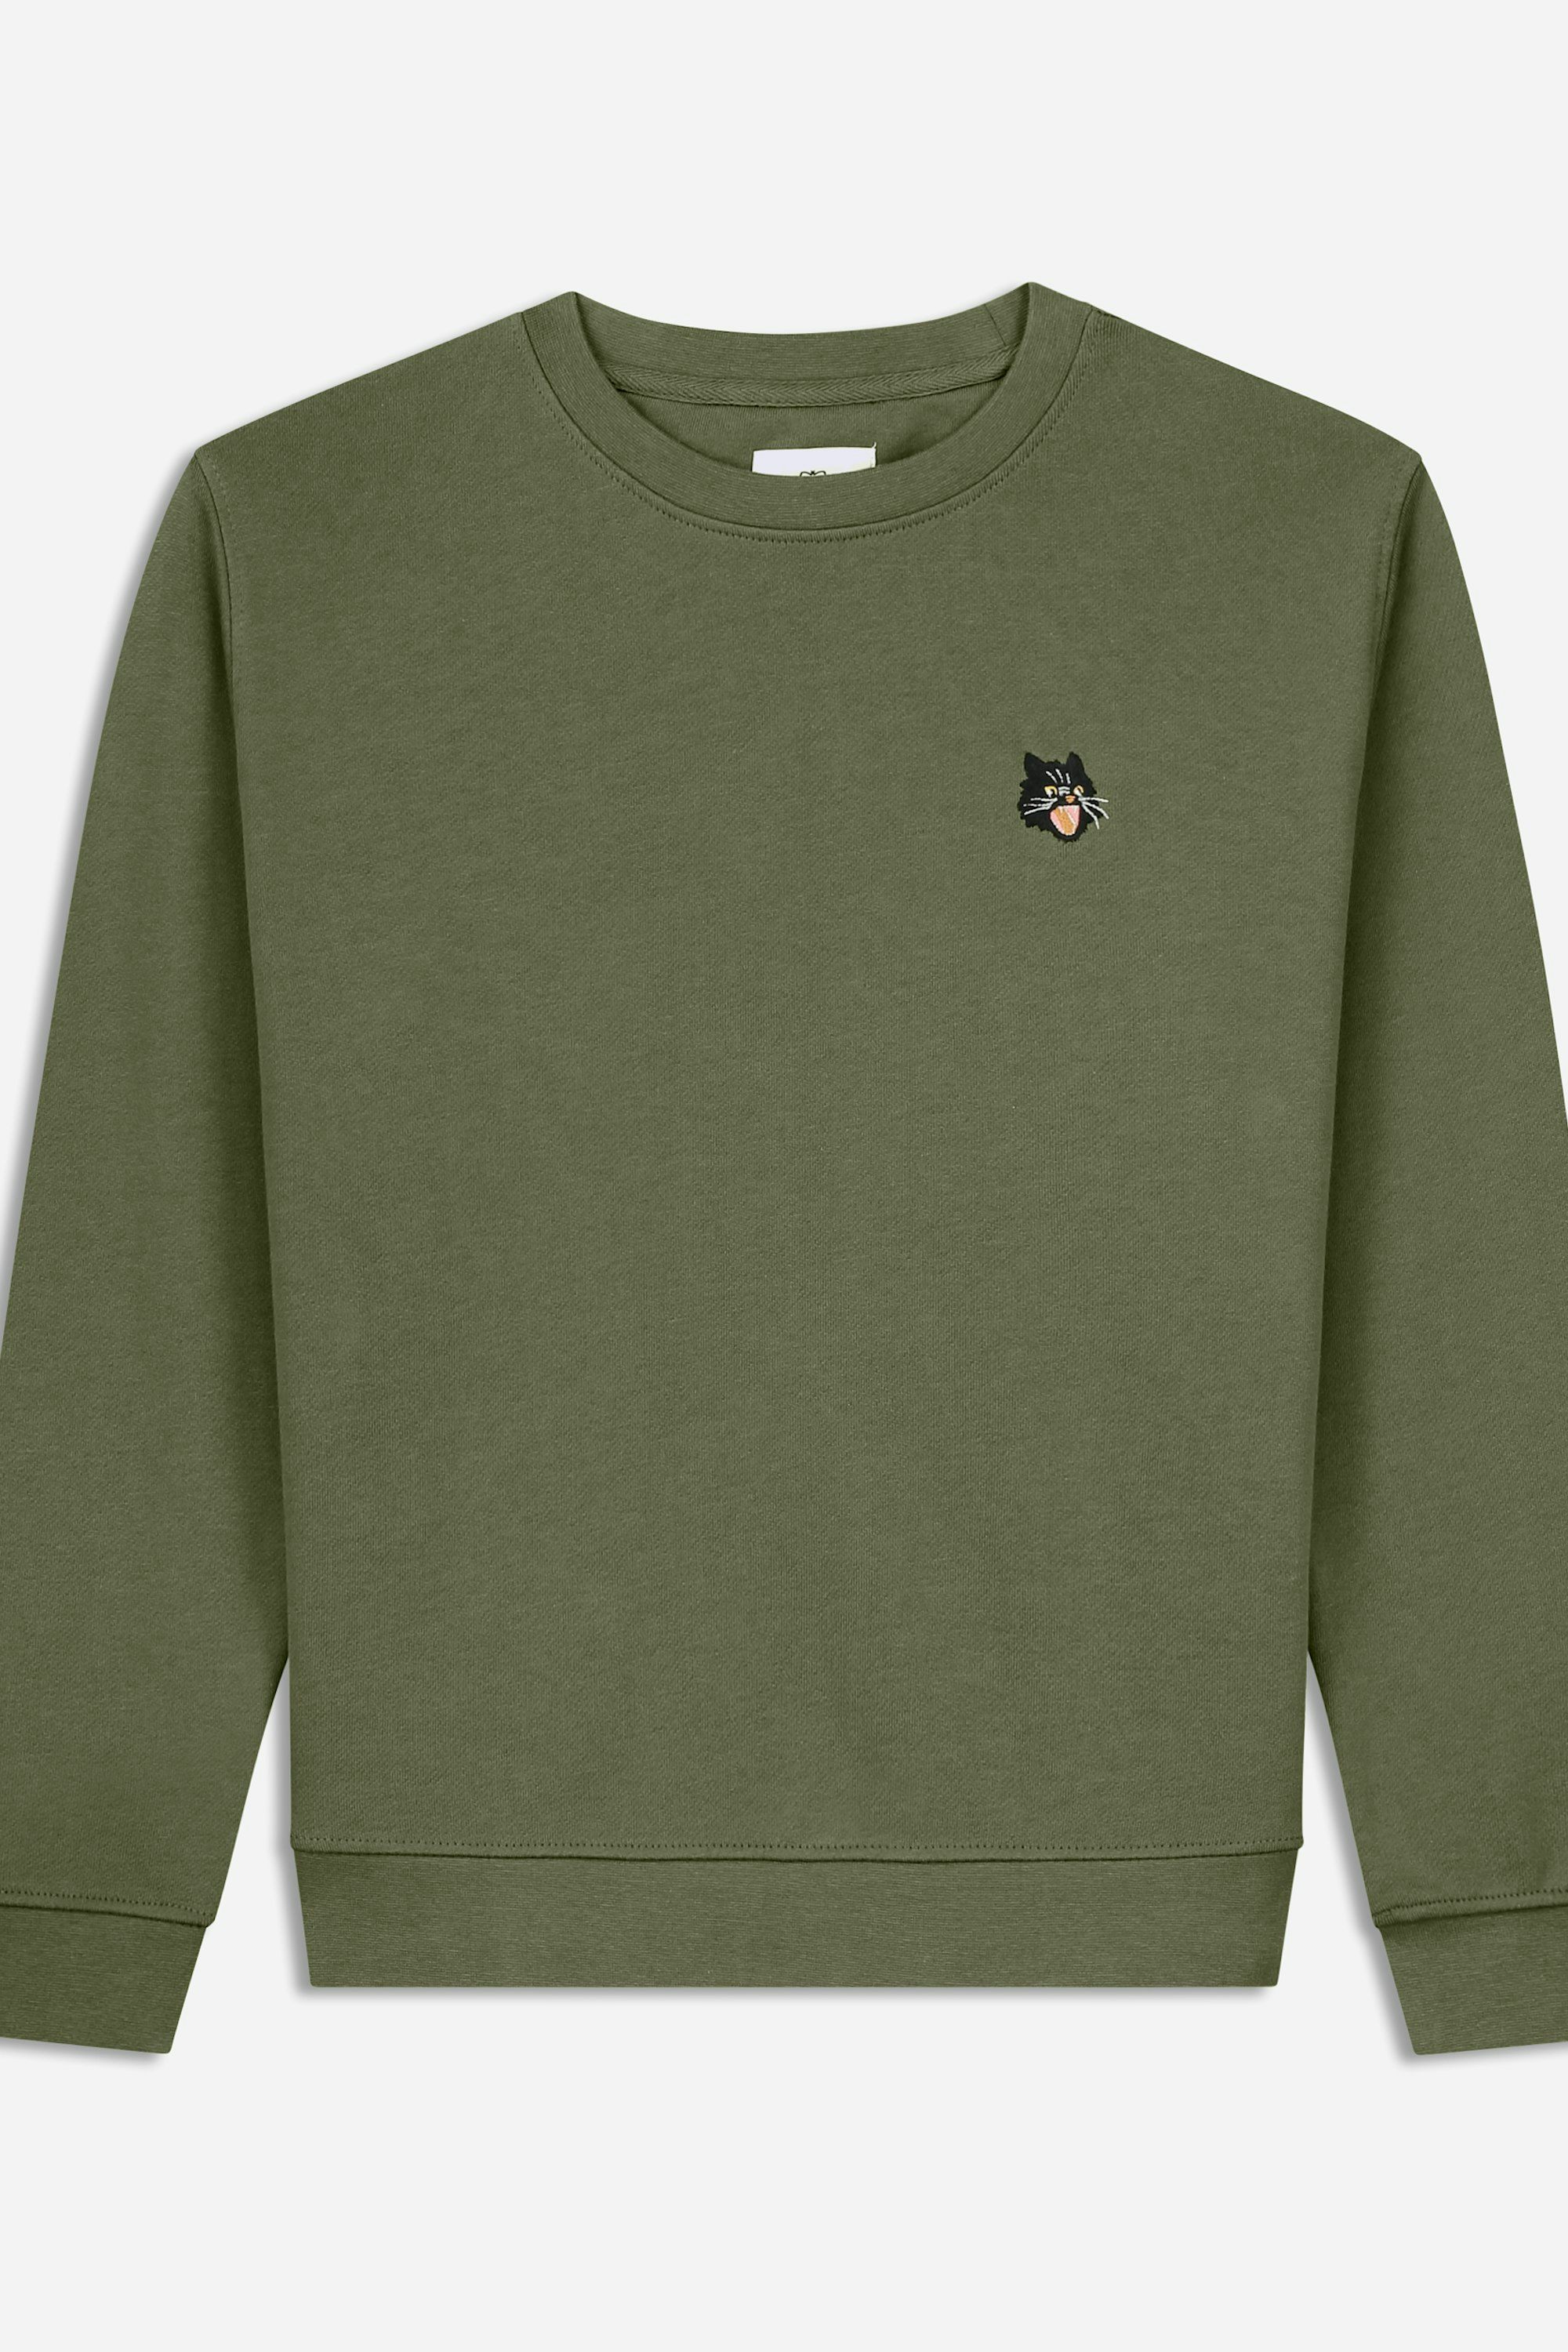 A-dam olive sweatshirt with catface embroidery from organic cotton | A-dam